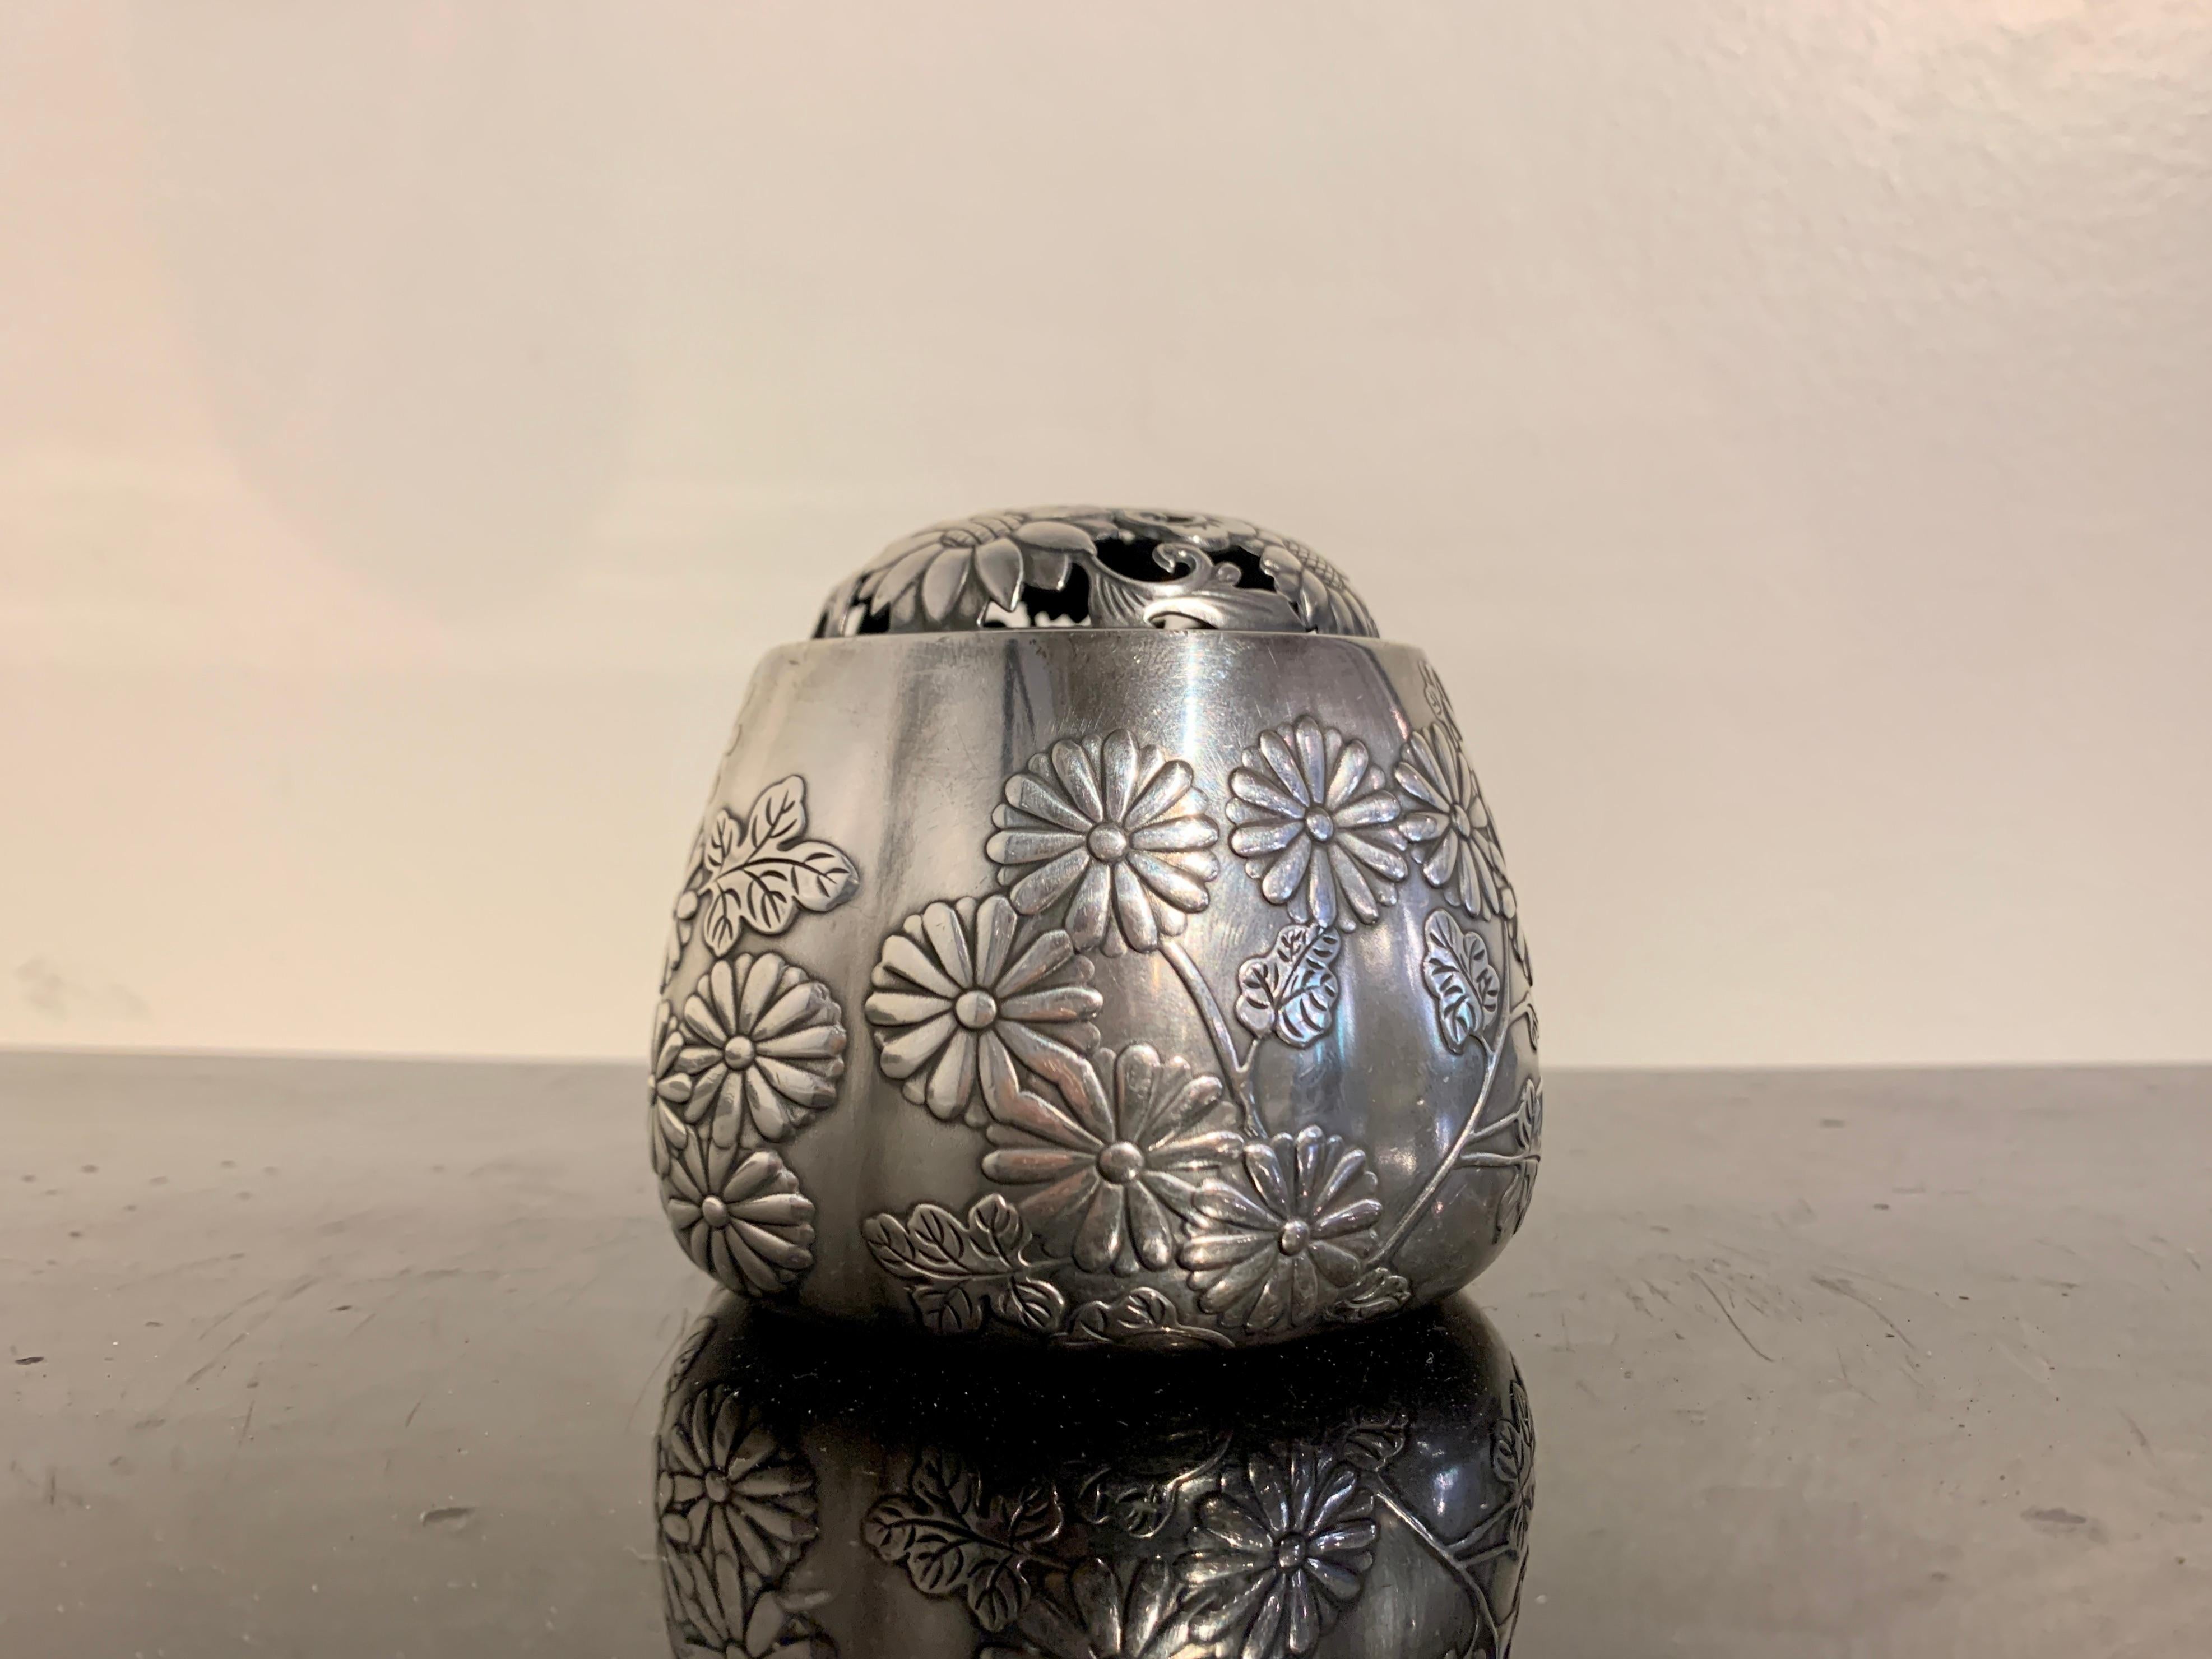 A lovely and luxurious Japanese silver incense burner of lobed melon form, akoda koro, marked jungin and signed Nomura, Meiji Period, circa 1900, Japan.

The silver koro, vessel for burning incense, takes on a traditional six lobed melon shape, a